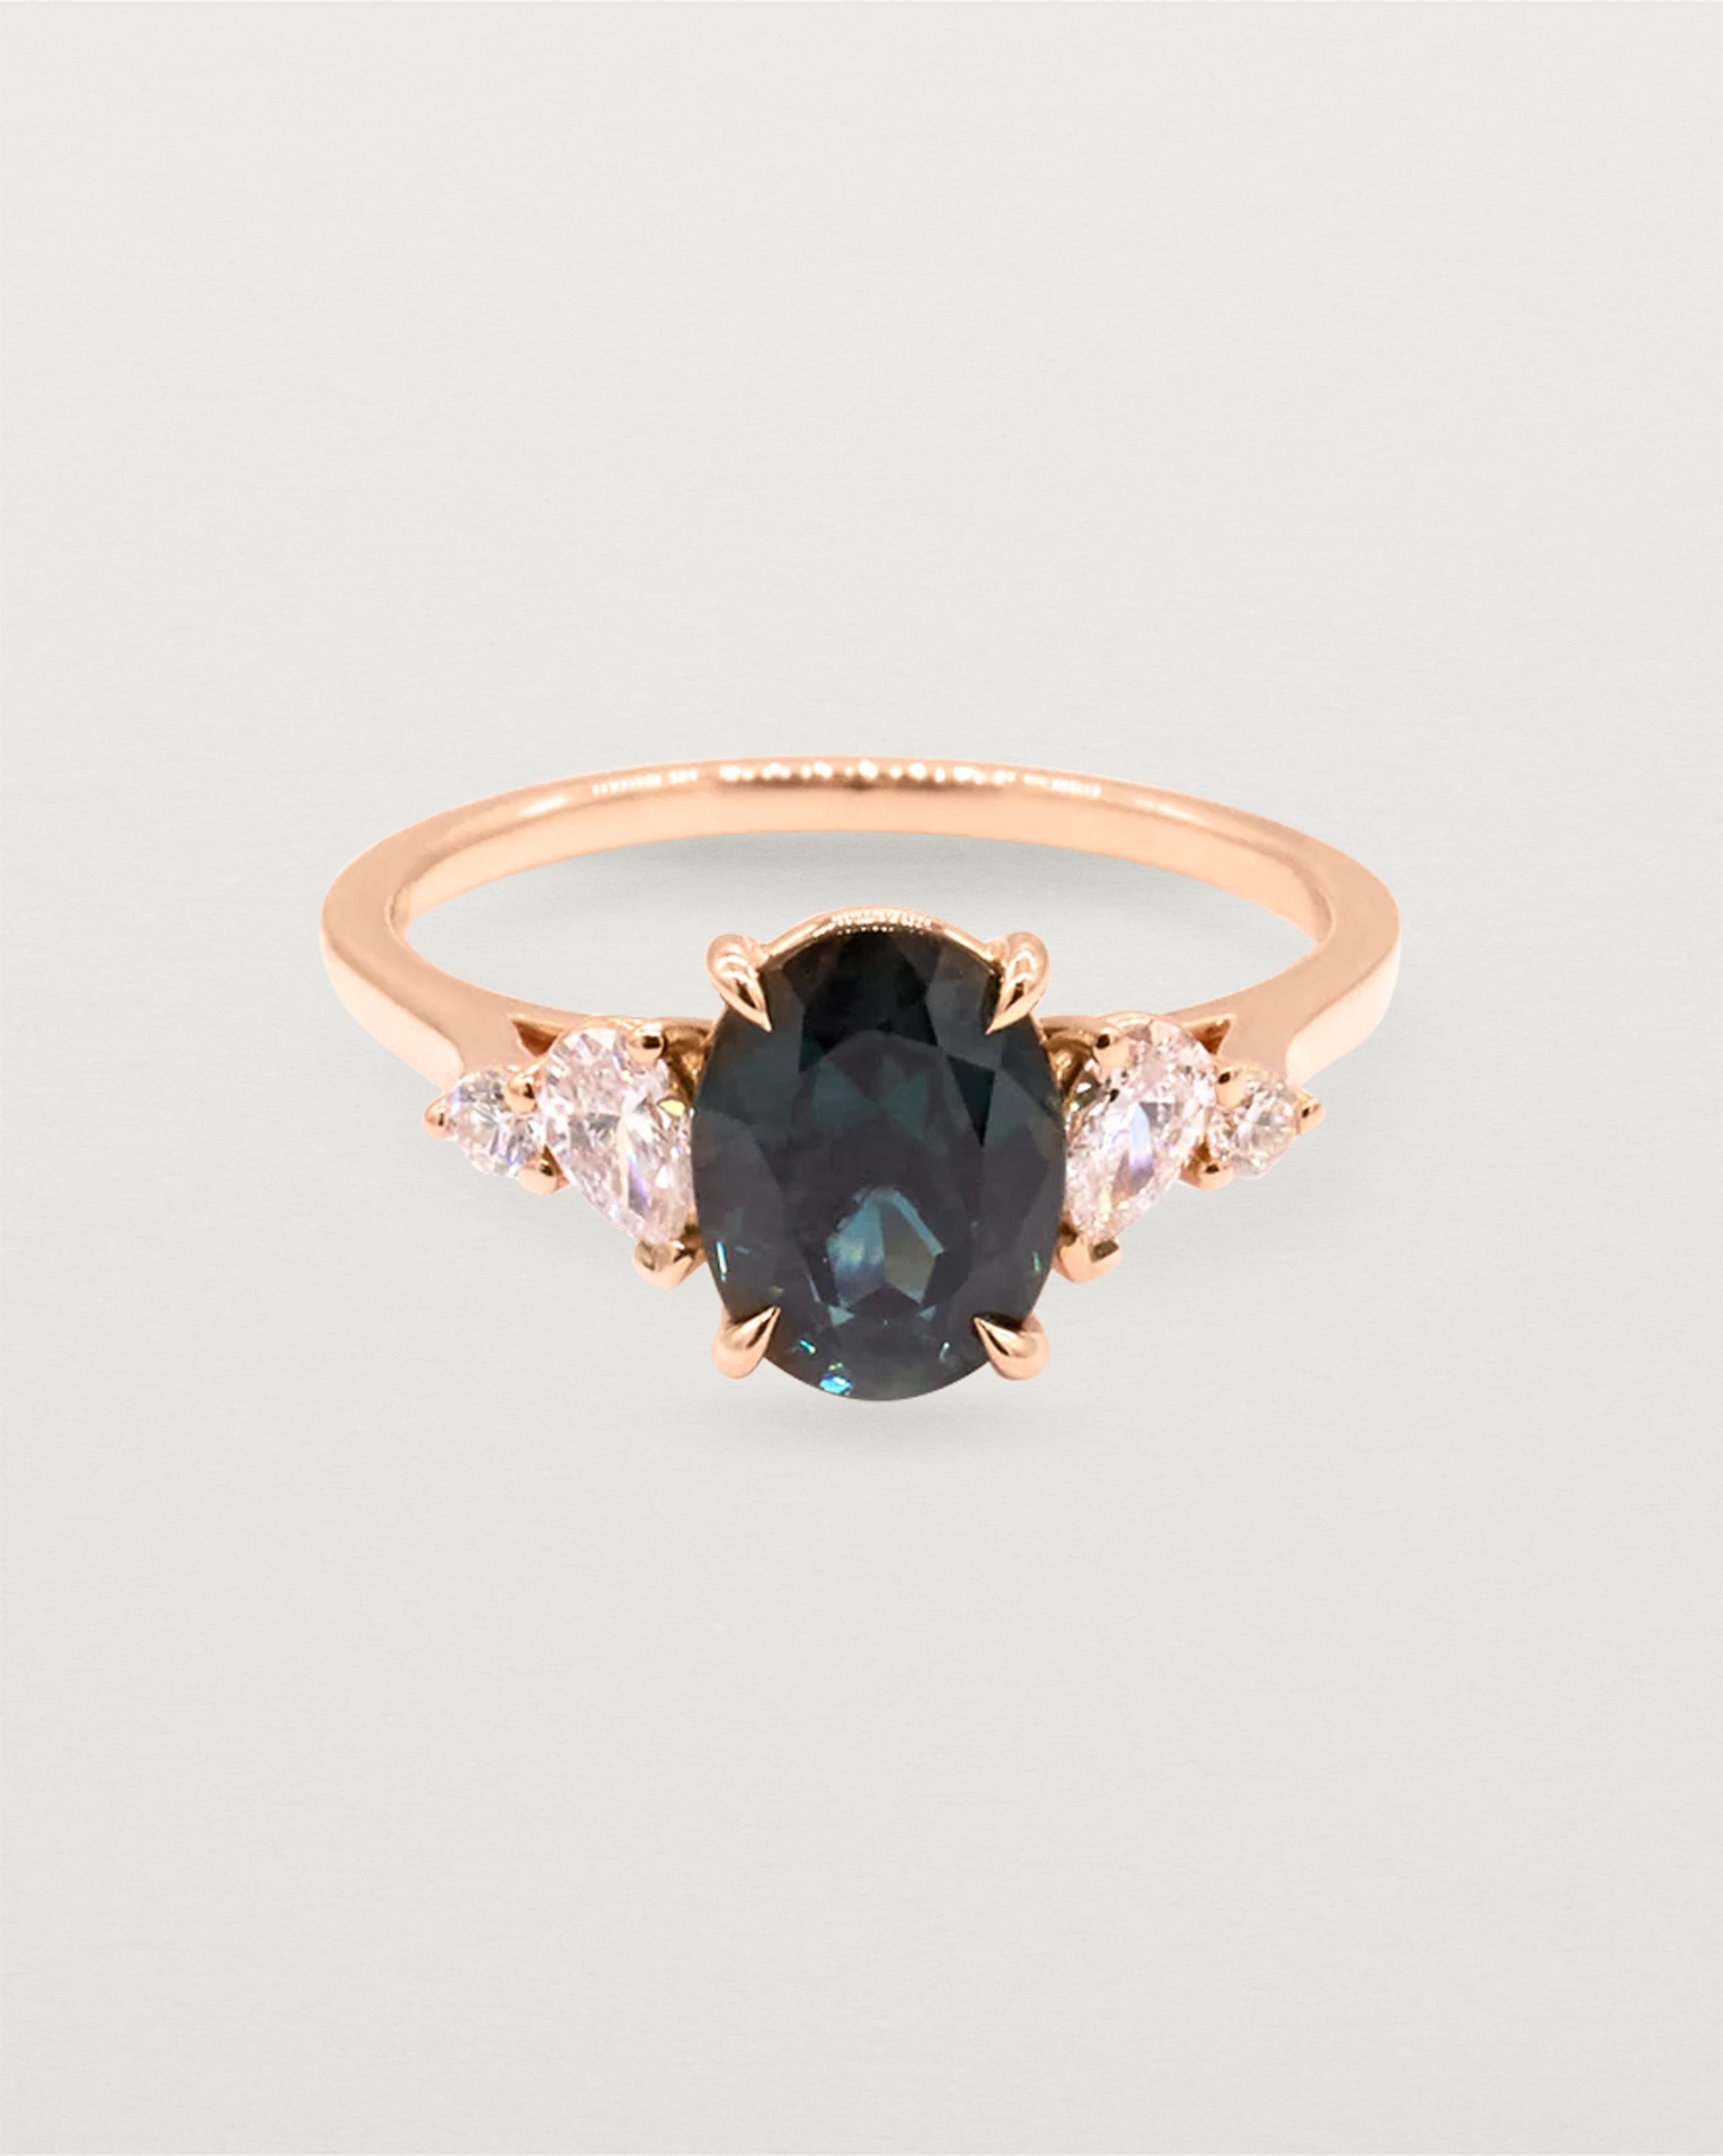 A deep Australian teal sapphire sits within a four claw setting, framed by a delicate cluster of pear and round white diamonds atop a rose gold soft square band.